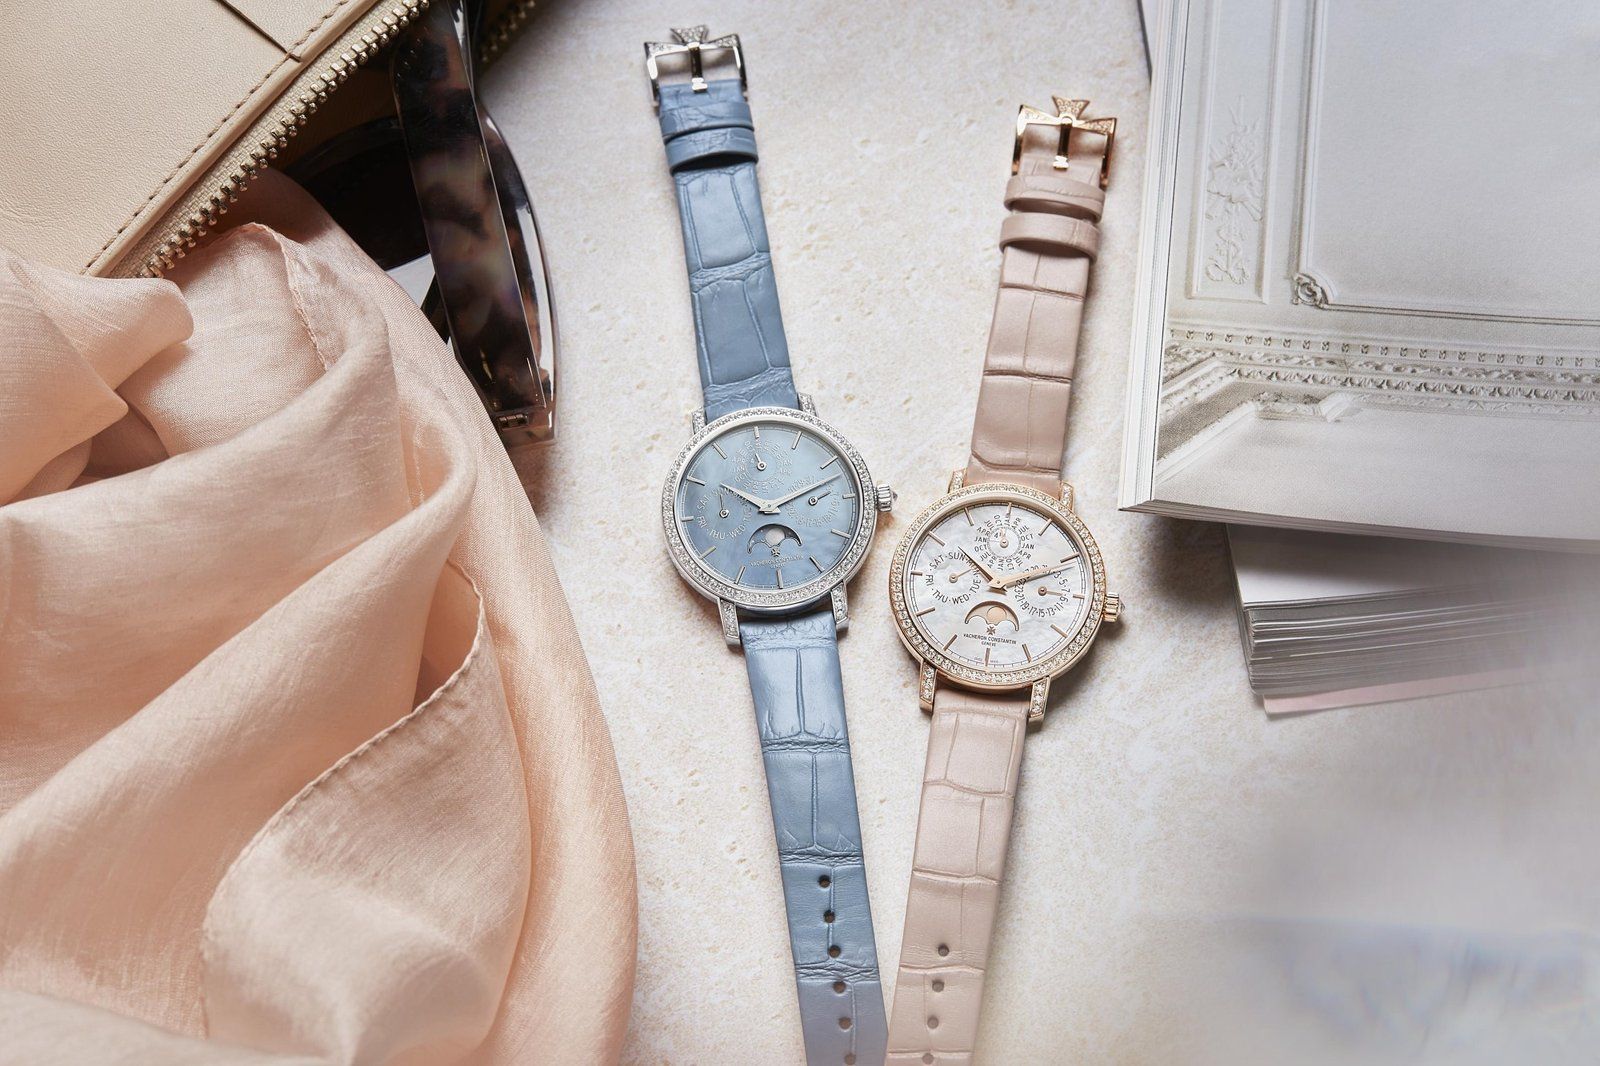 Traditionnelle perpetual calendar ultra-thin in blue-grey (left) and white (right) mother-of-pearl dials